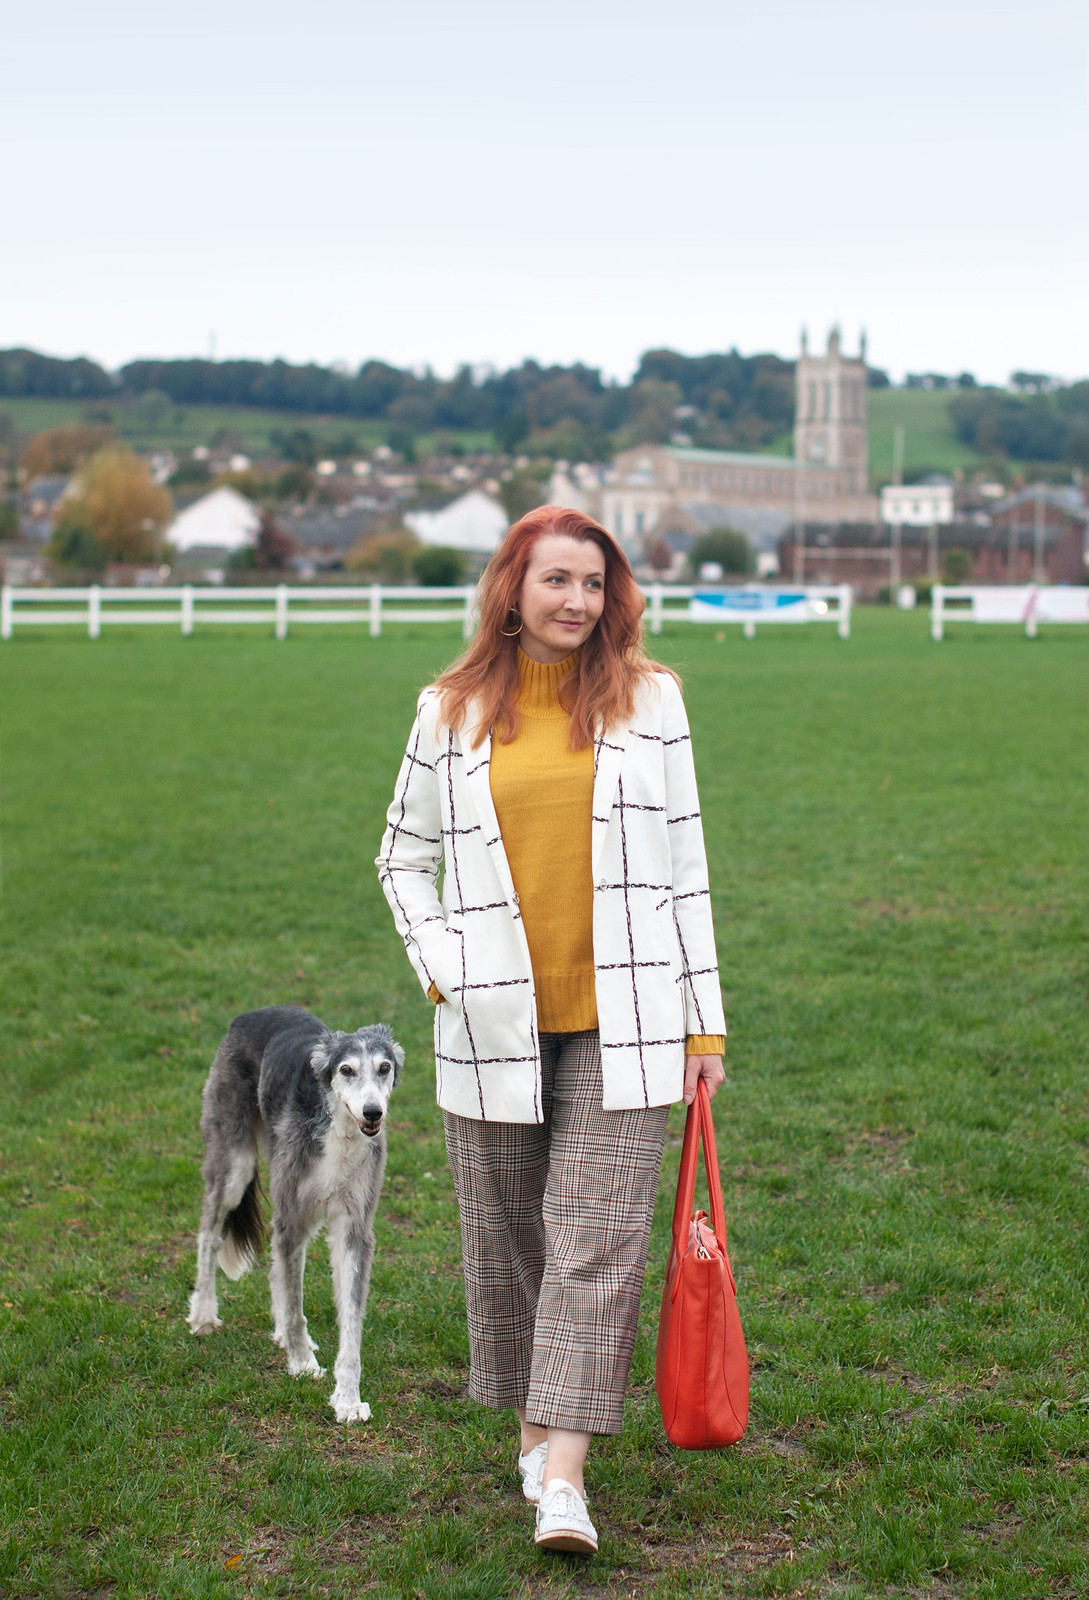 Pattern Mixed Checks With Orange and Yellow in Autumn, Over 40 Style | Not Dressed As Lamb